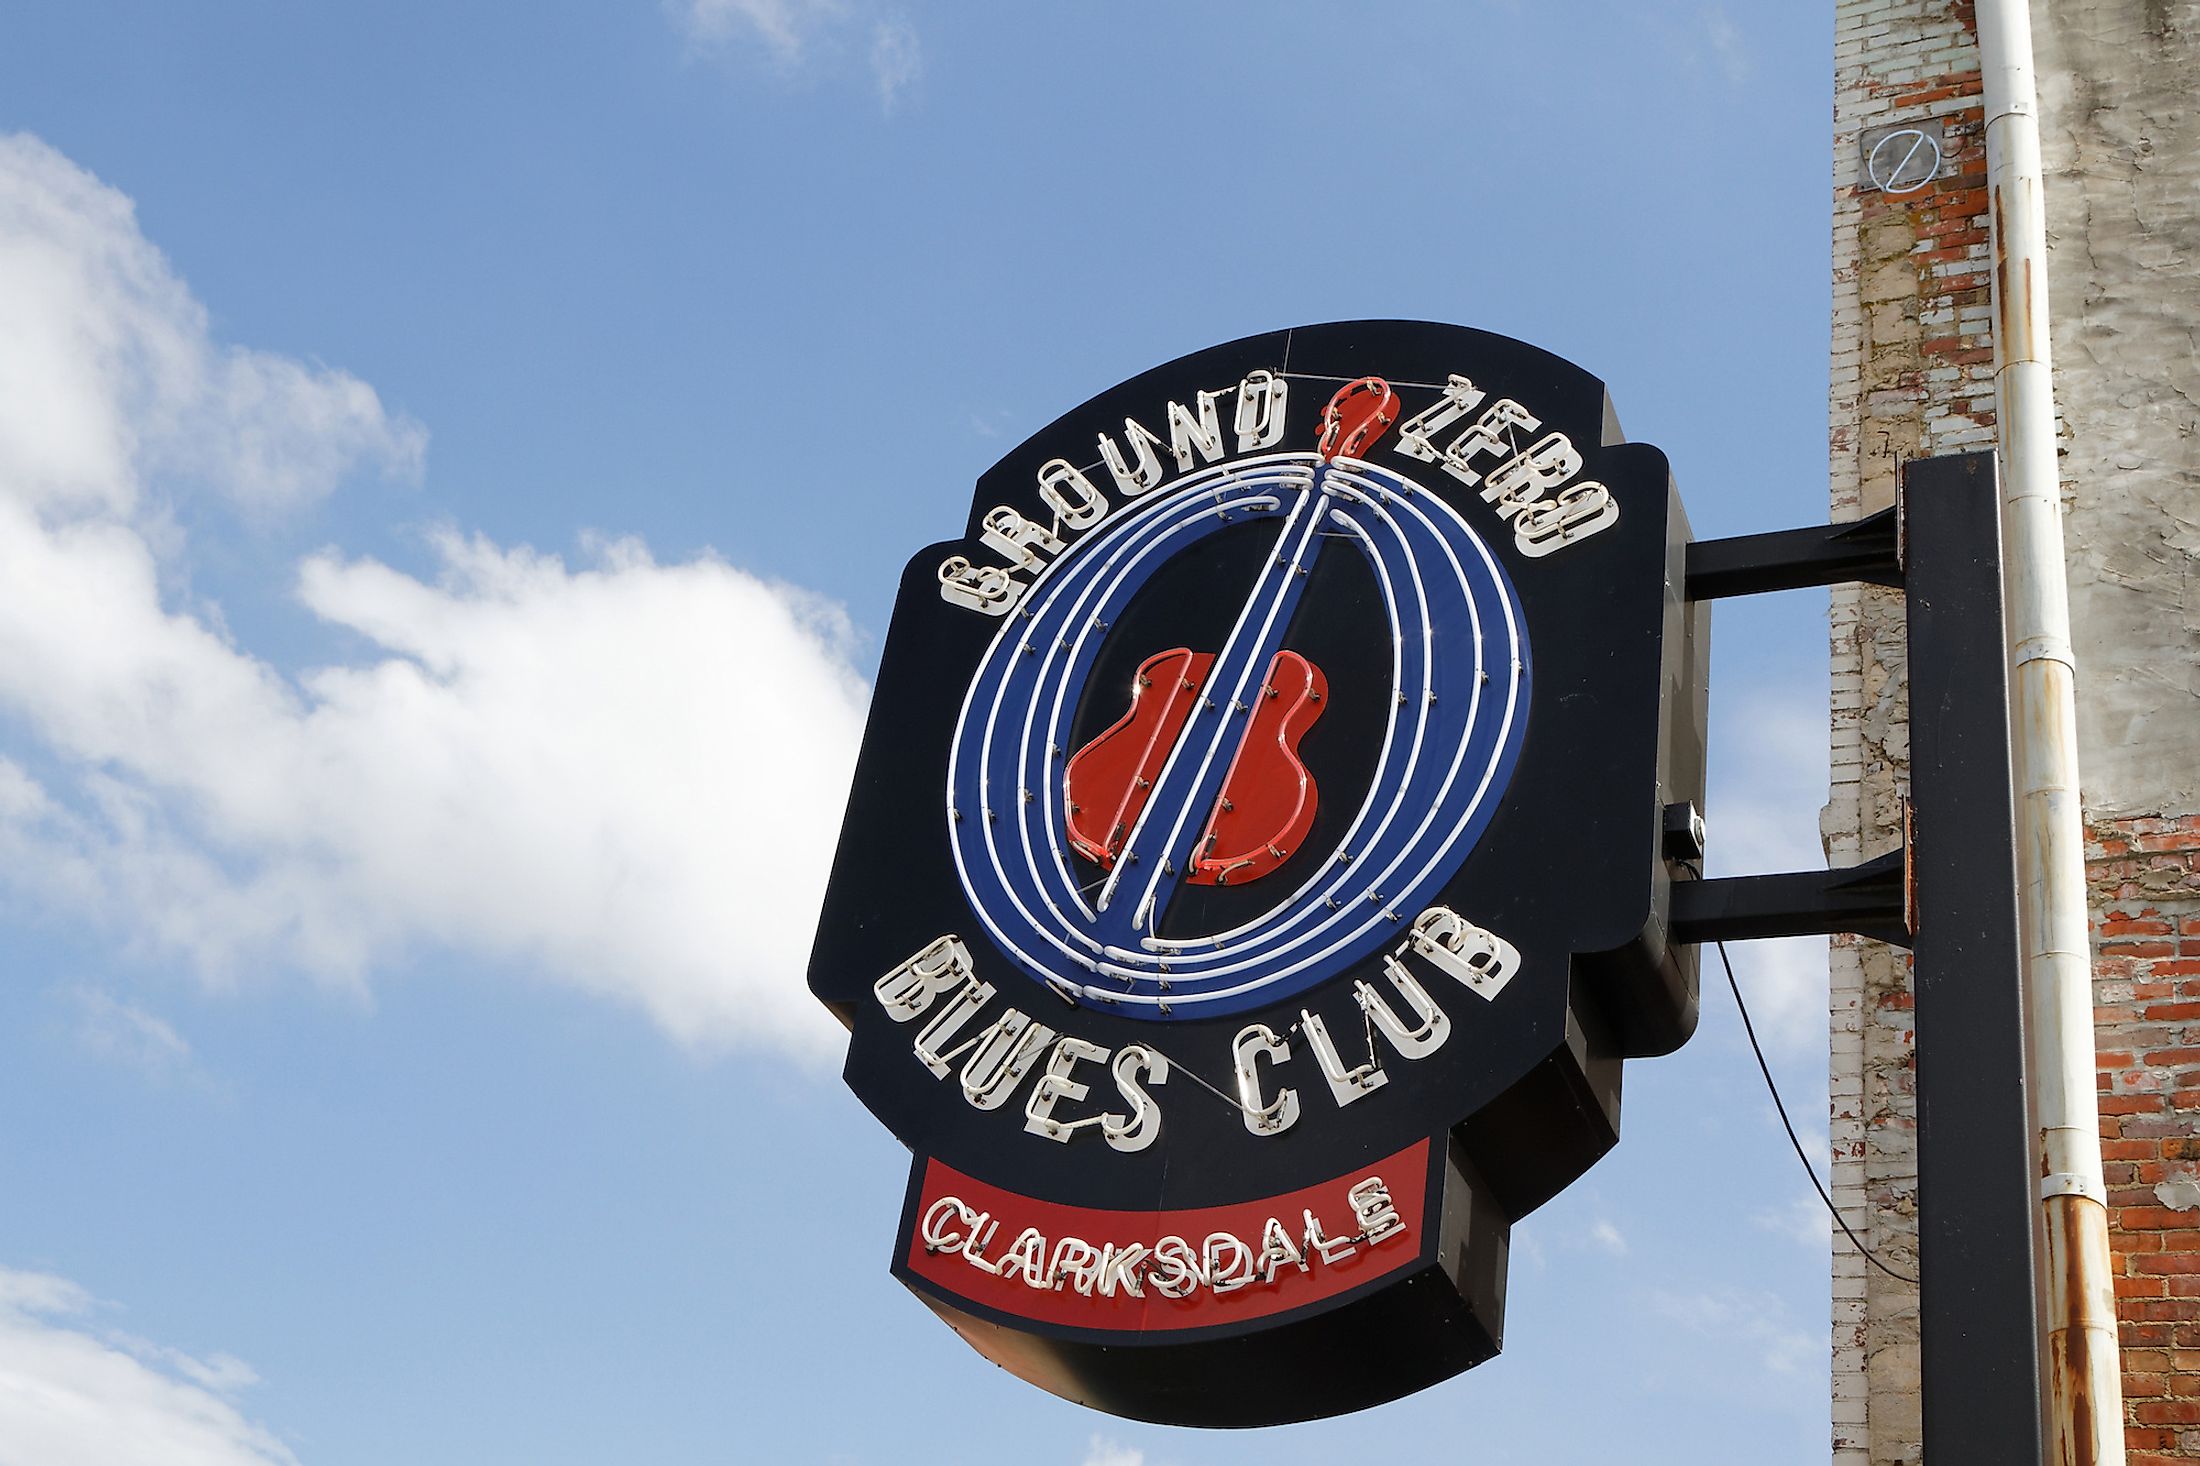 Entrance sign of the Ground Zero Blues Club in Clarksdale. Editorial credit: Pierre Jean Durieu / Shutterstock.com